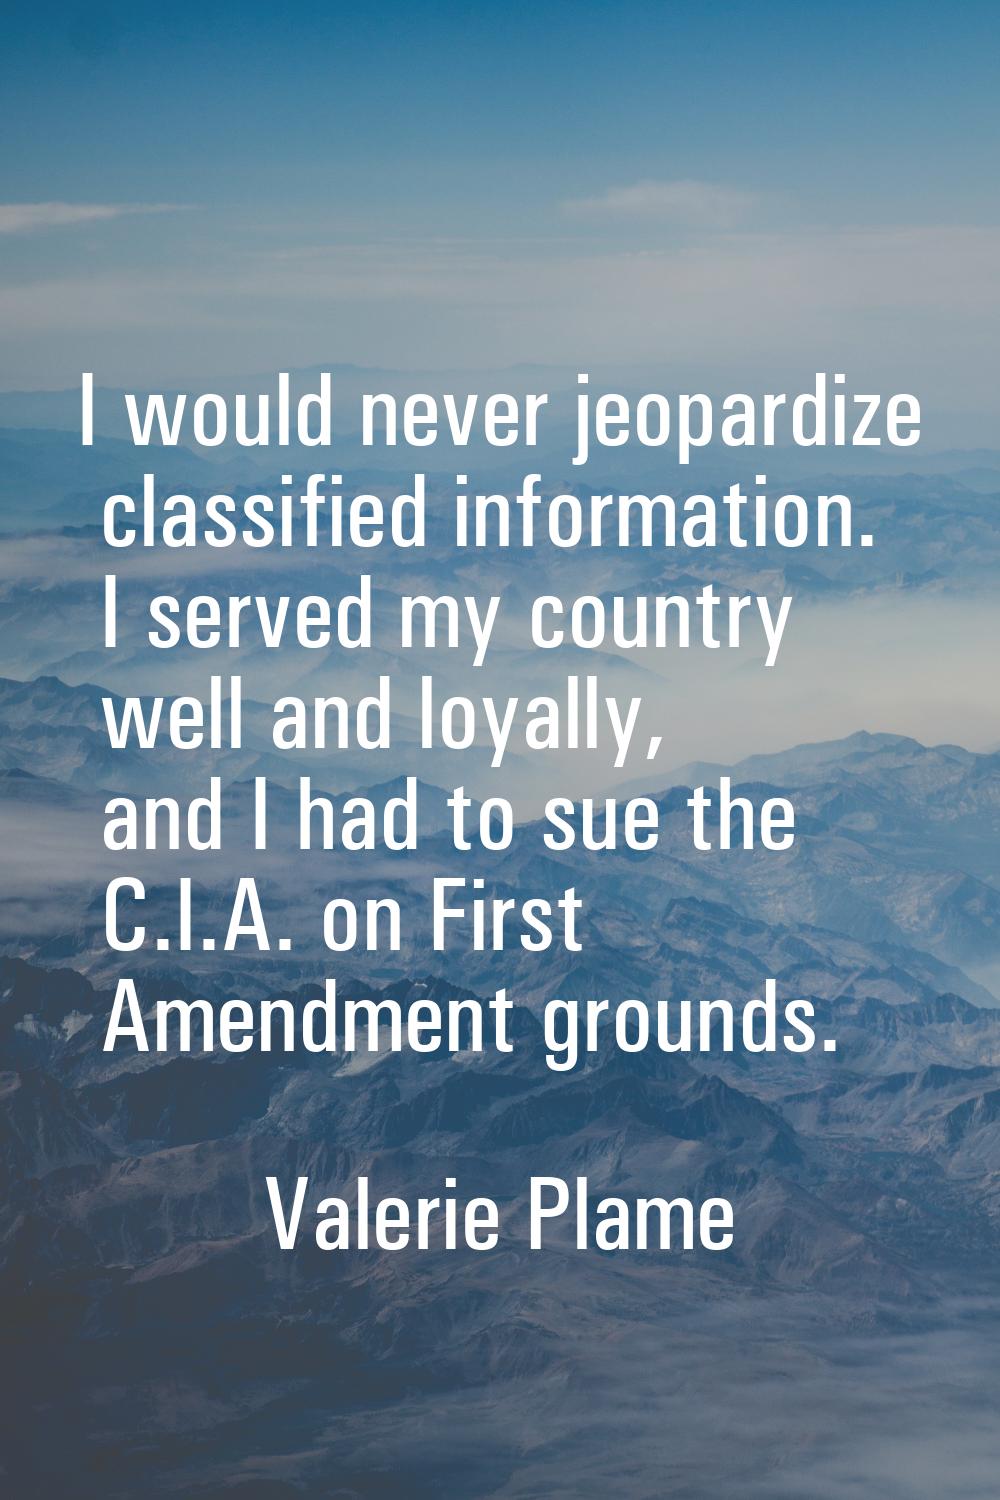 I would never jeopardize classified information. I served my country well and loyally, and I had to